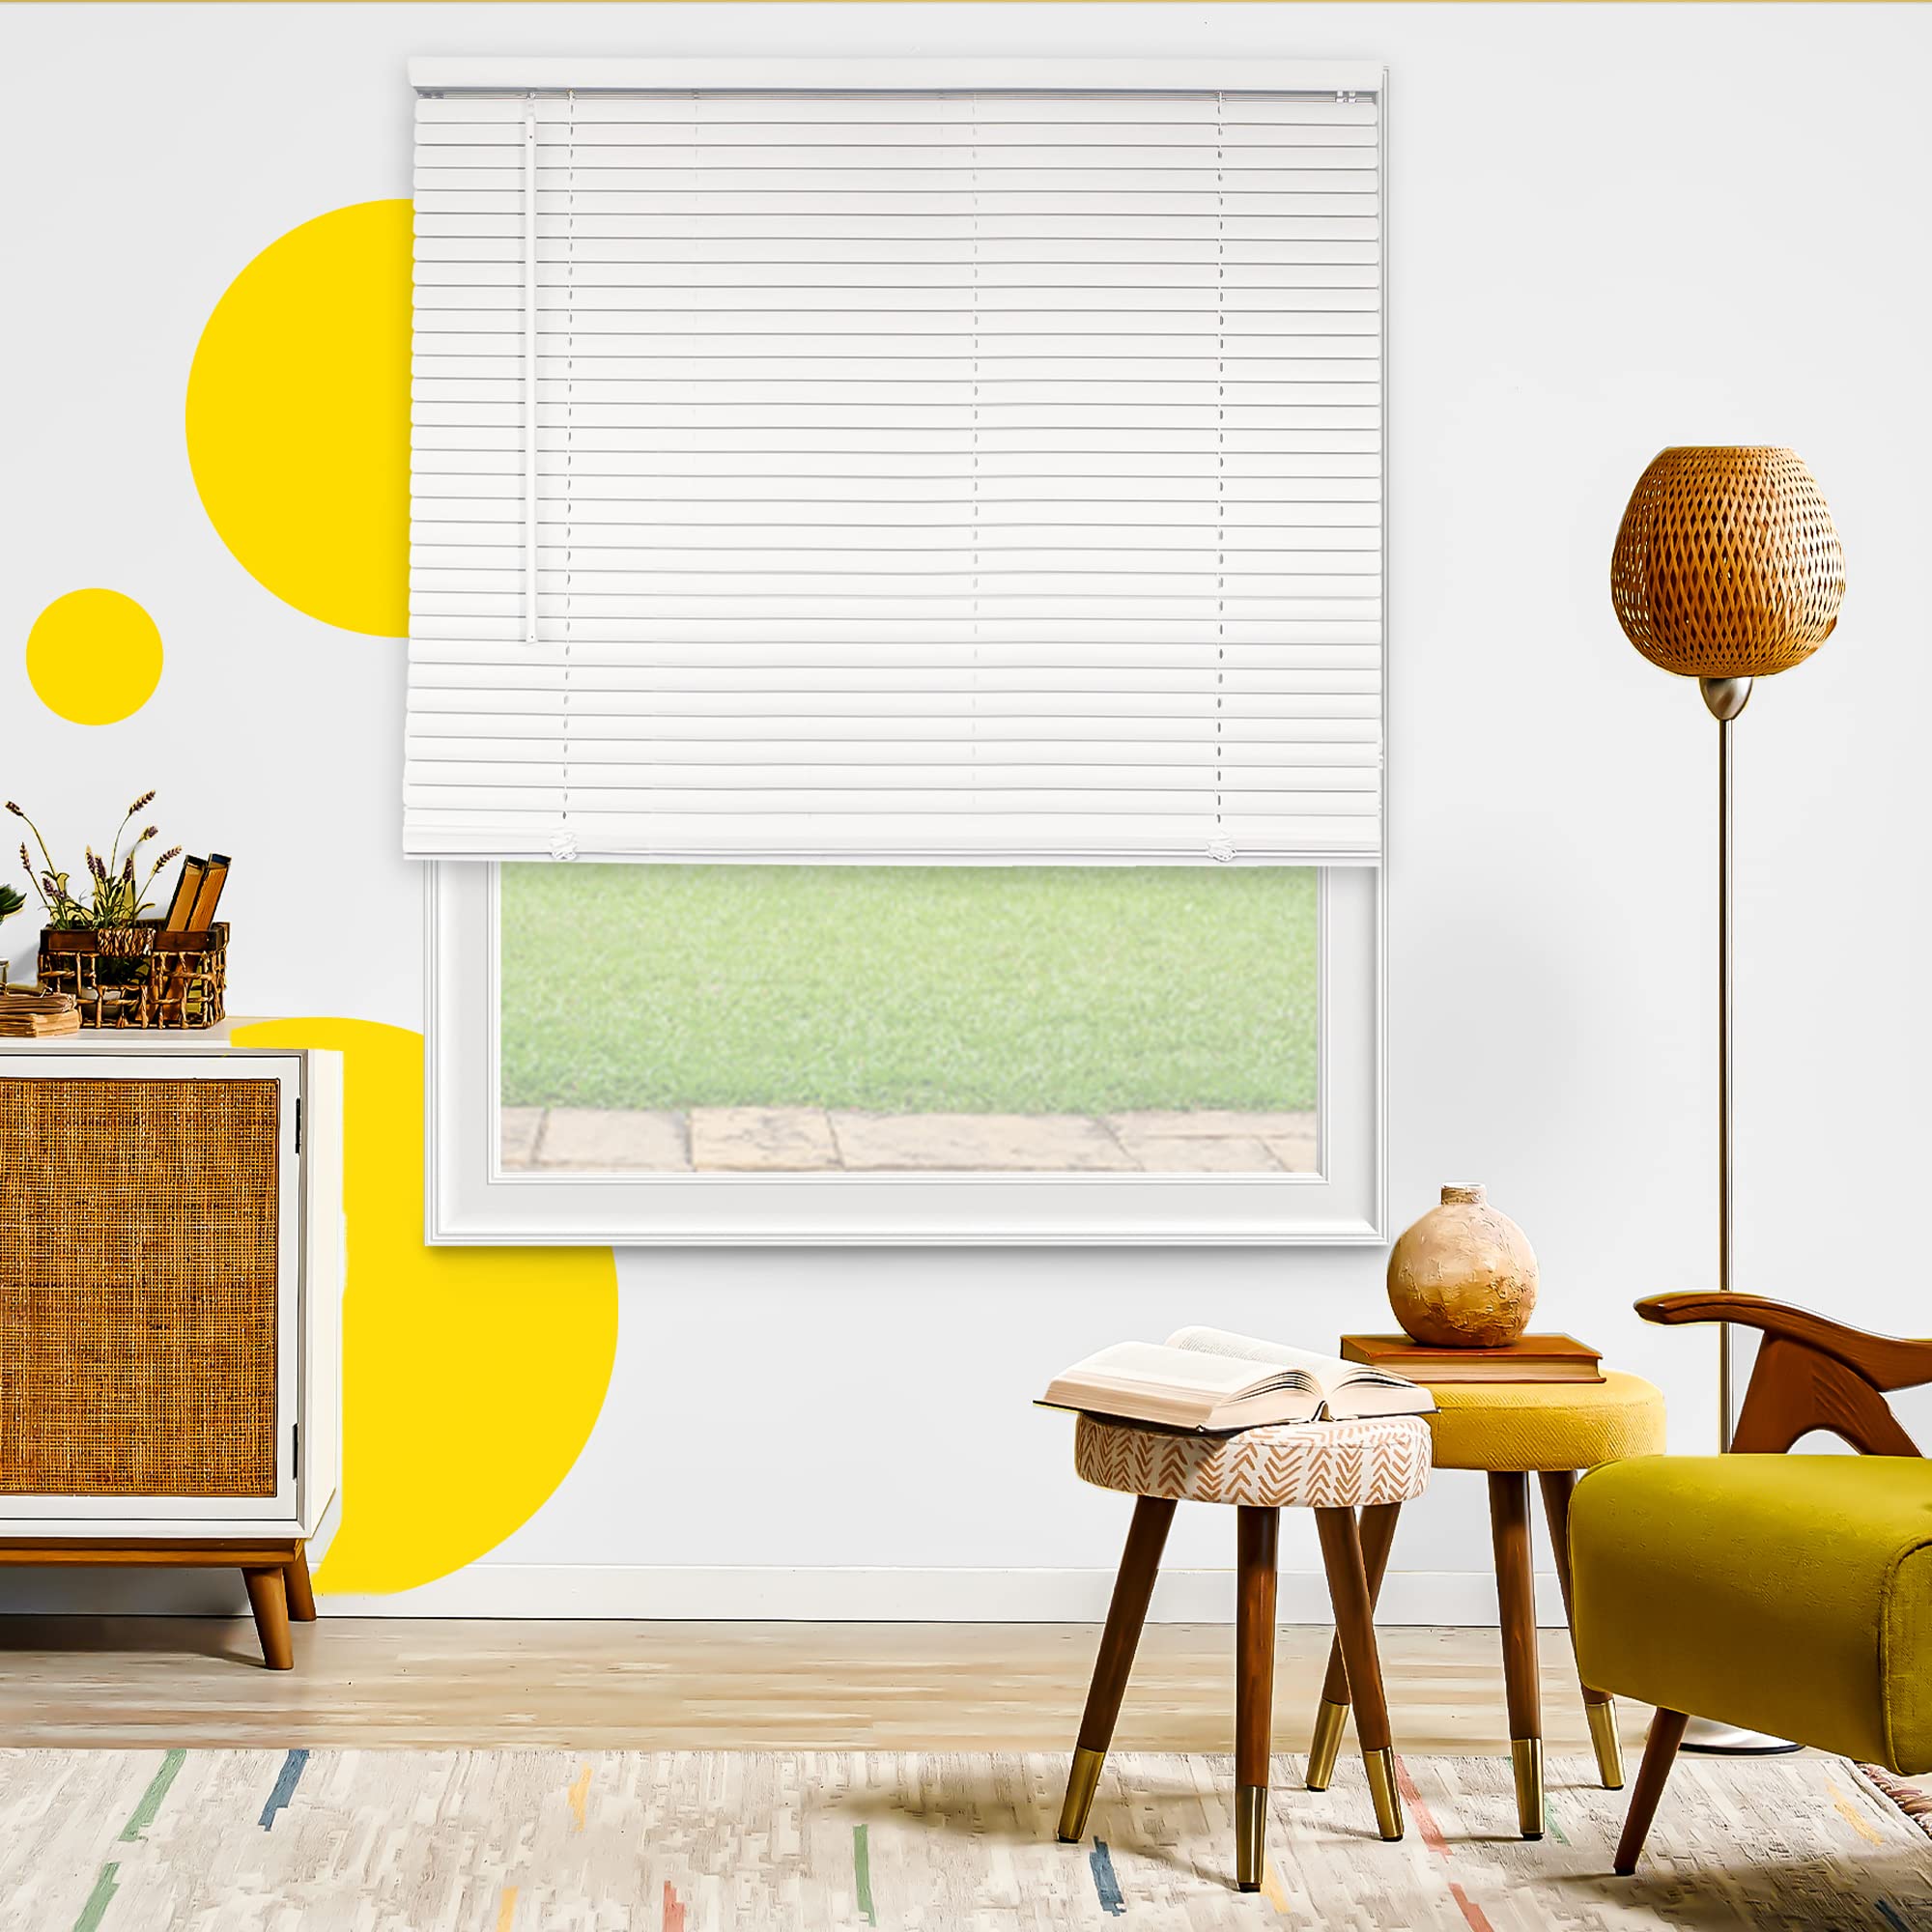 YELLOW BLINDS Blinds for Windows, Mini Blinds, Window Blinds, Door Blinds, Blinds & Shades, camper Blinds, Mini Blinds for Windo